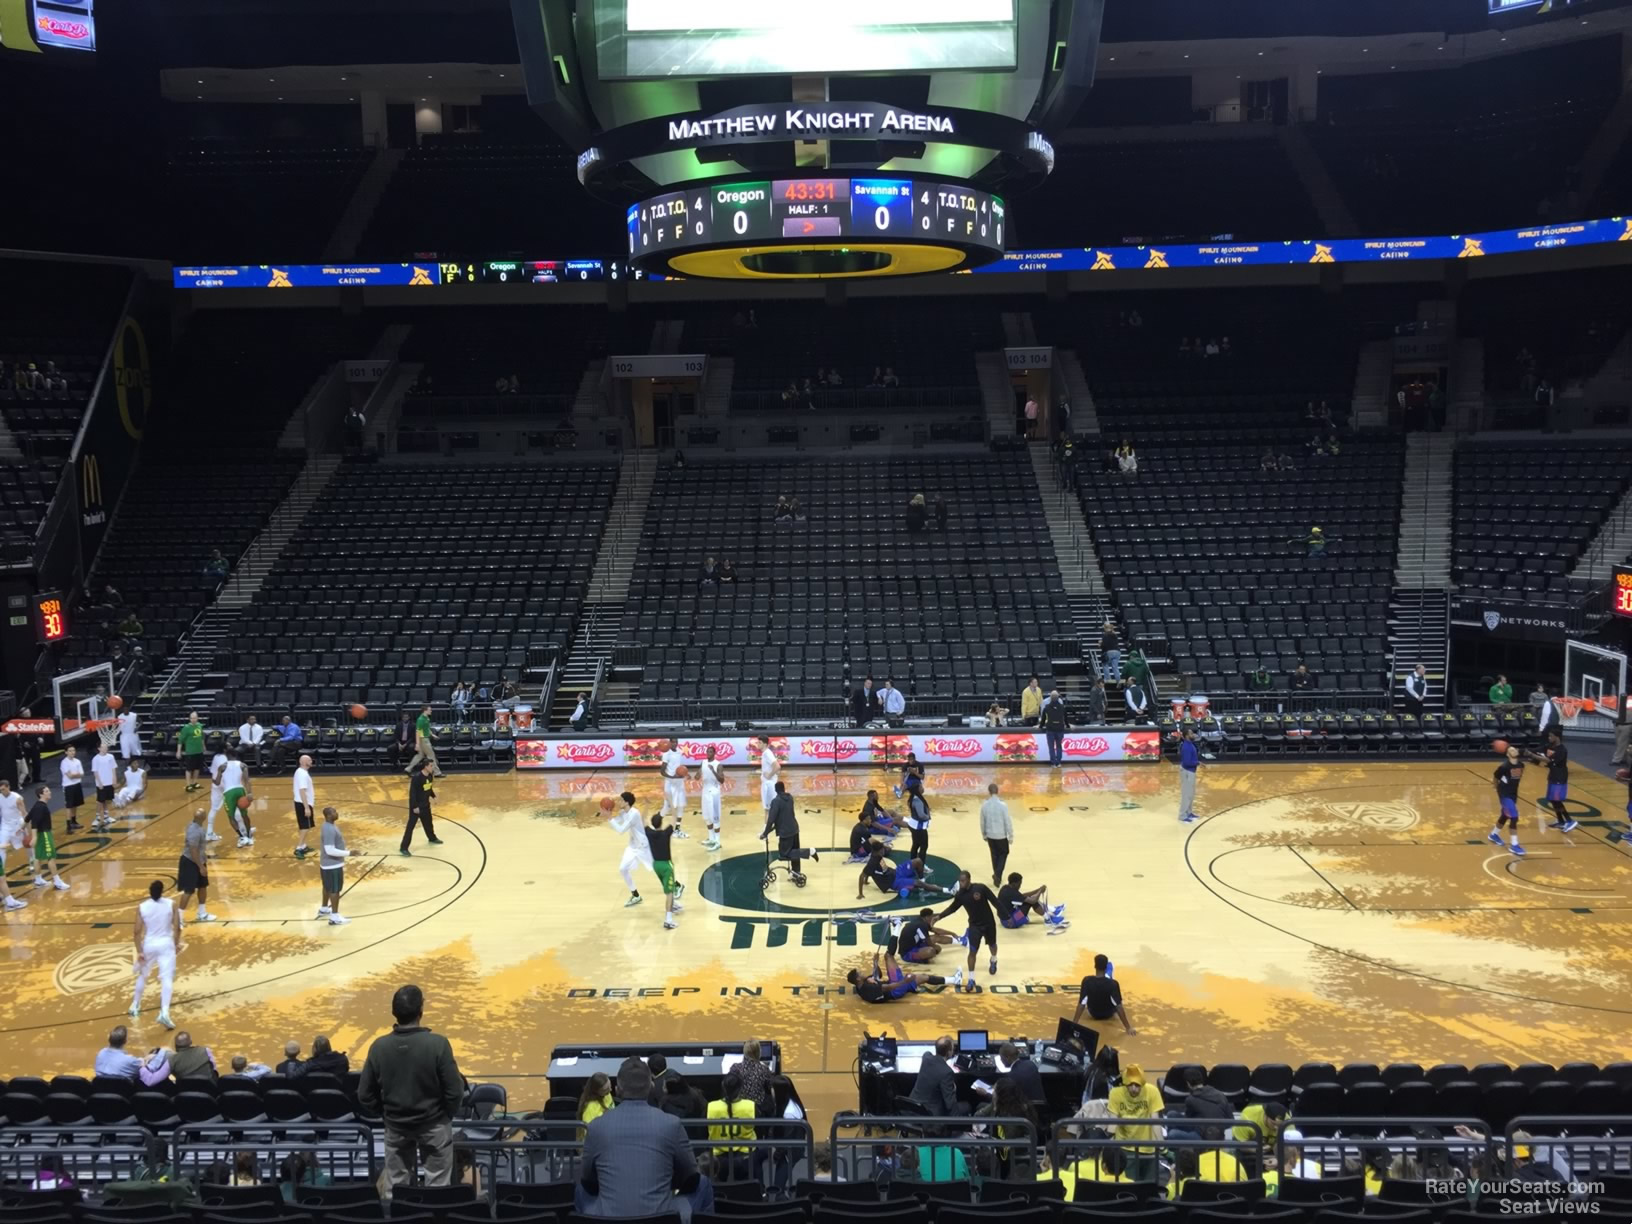 section 112, row k seat view  - matthew knight arena